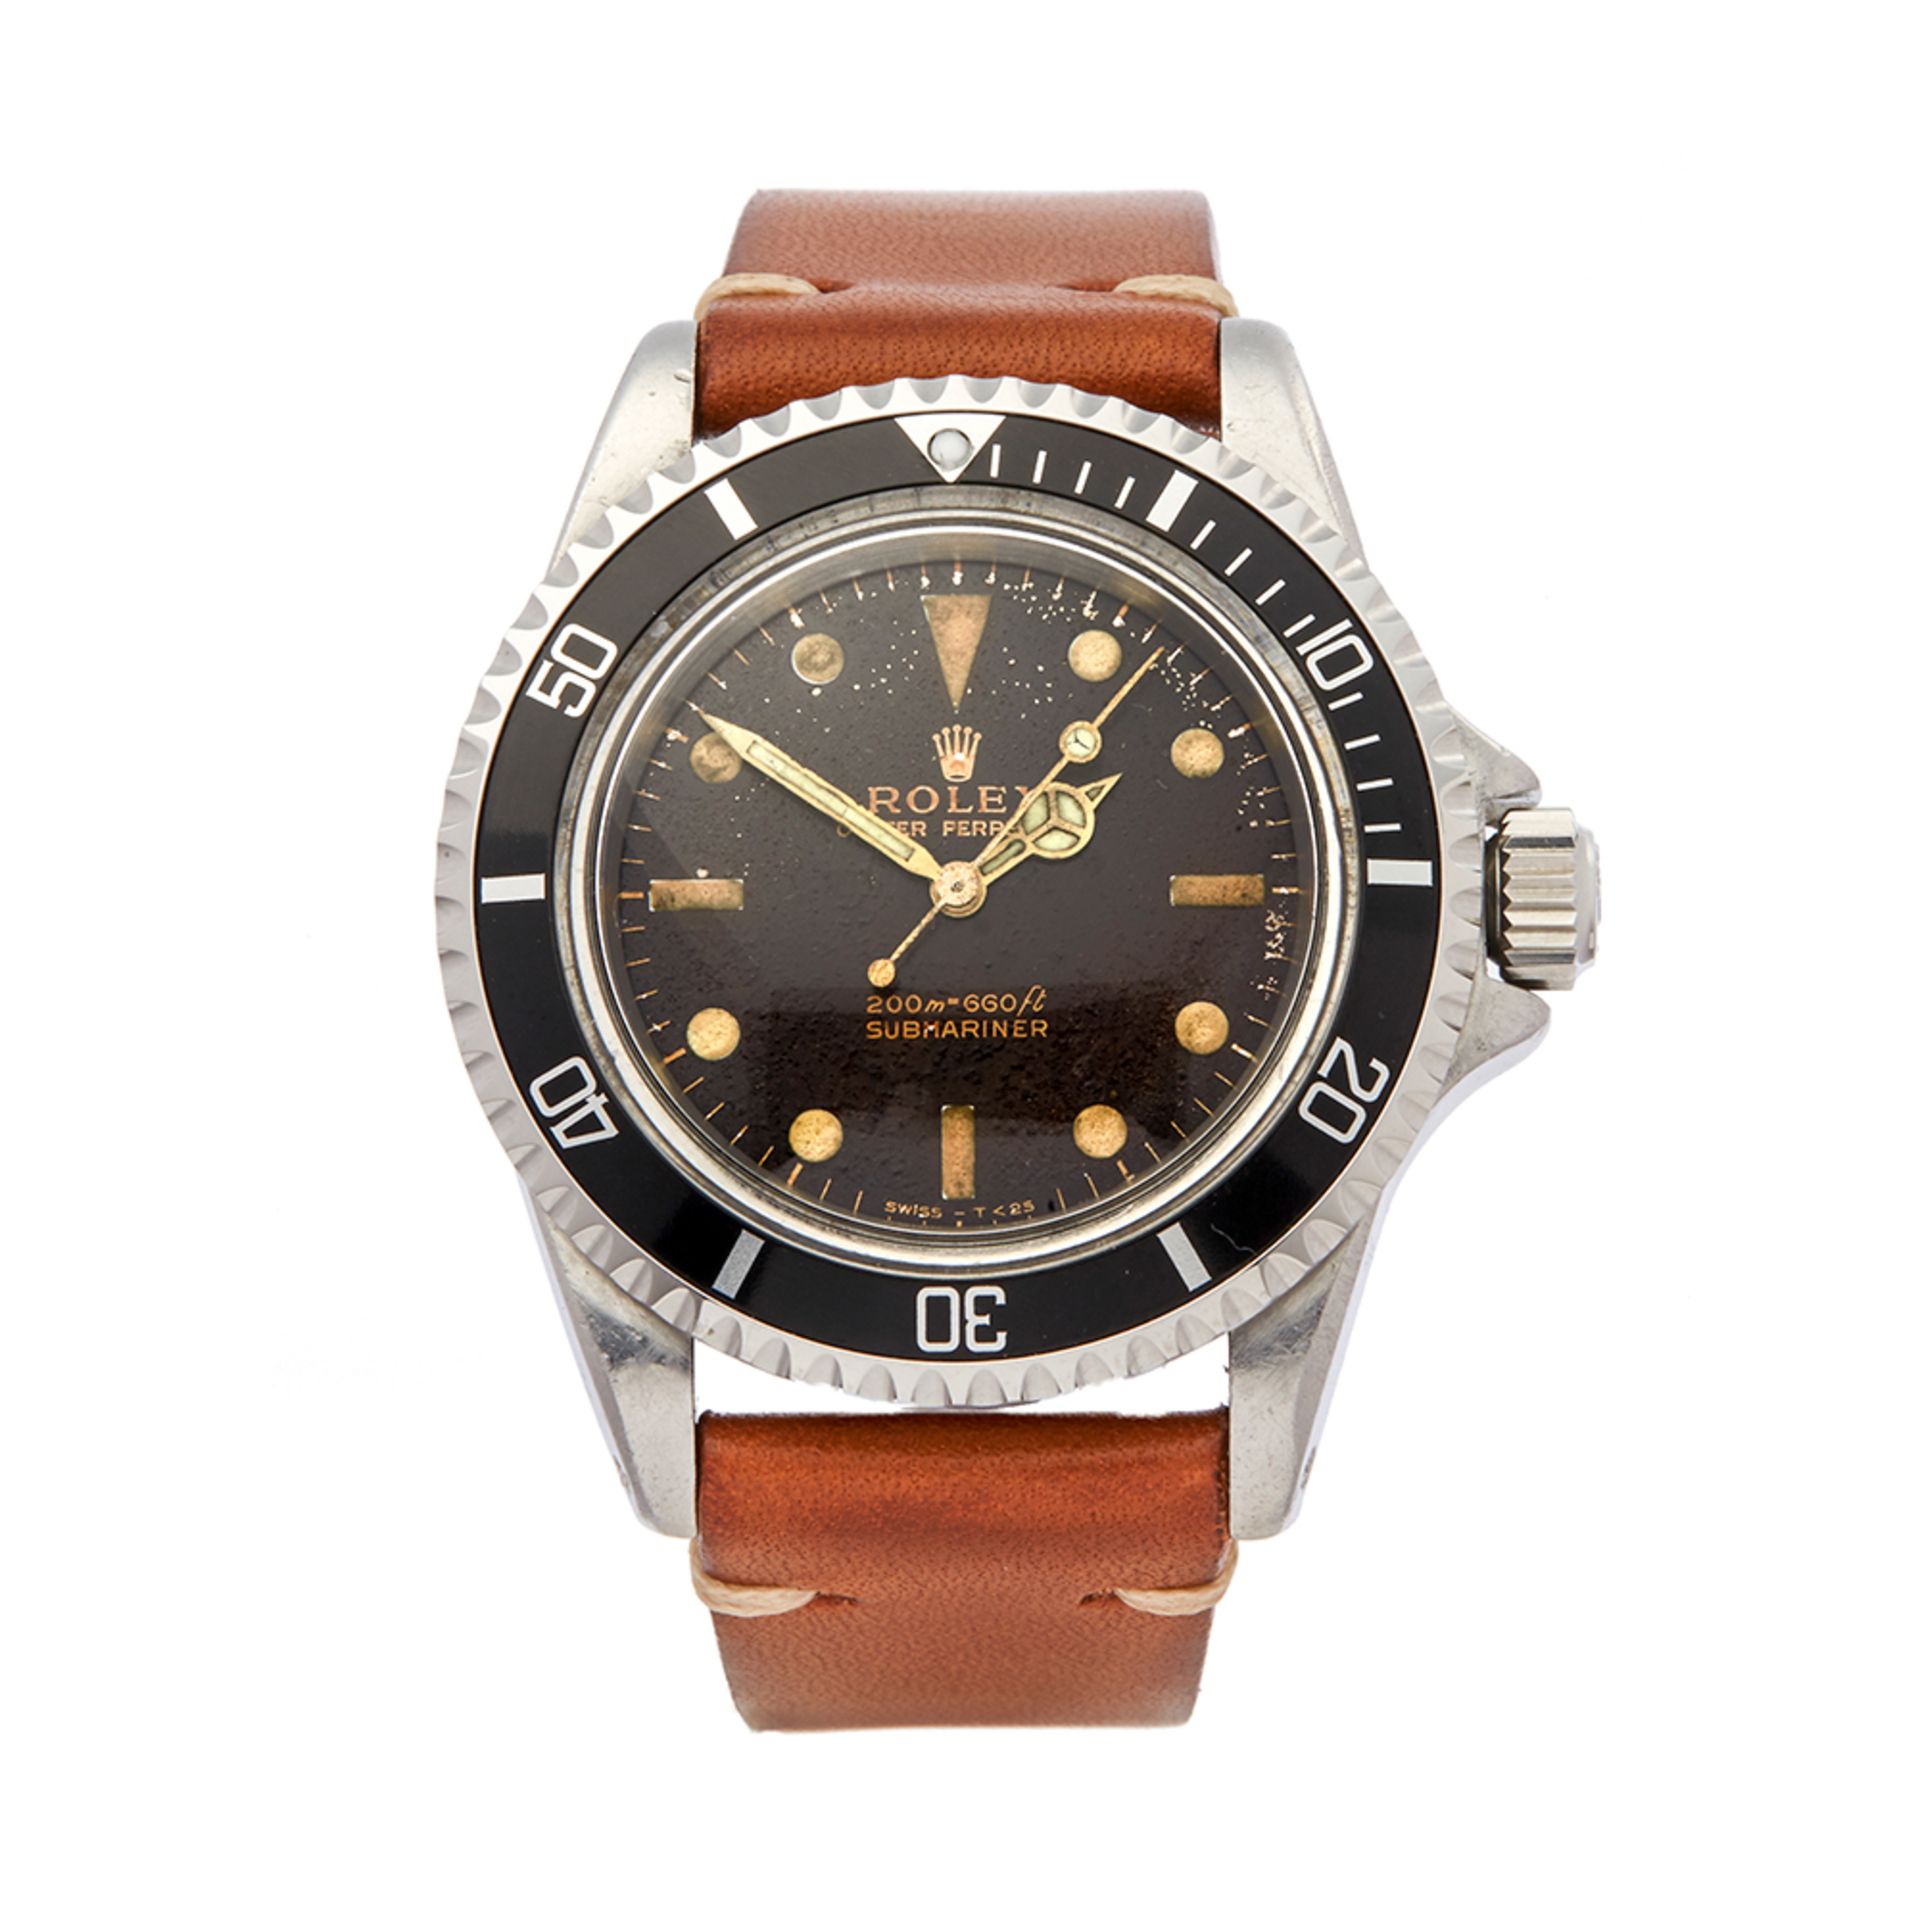 1964 Rolex Submariner Non Date Tropical Dial Stainless Steel - 5513 - Image 4 of 10